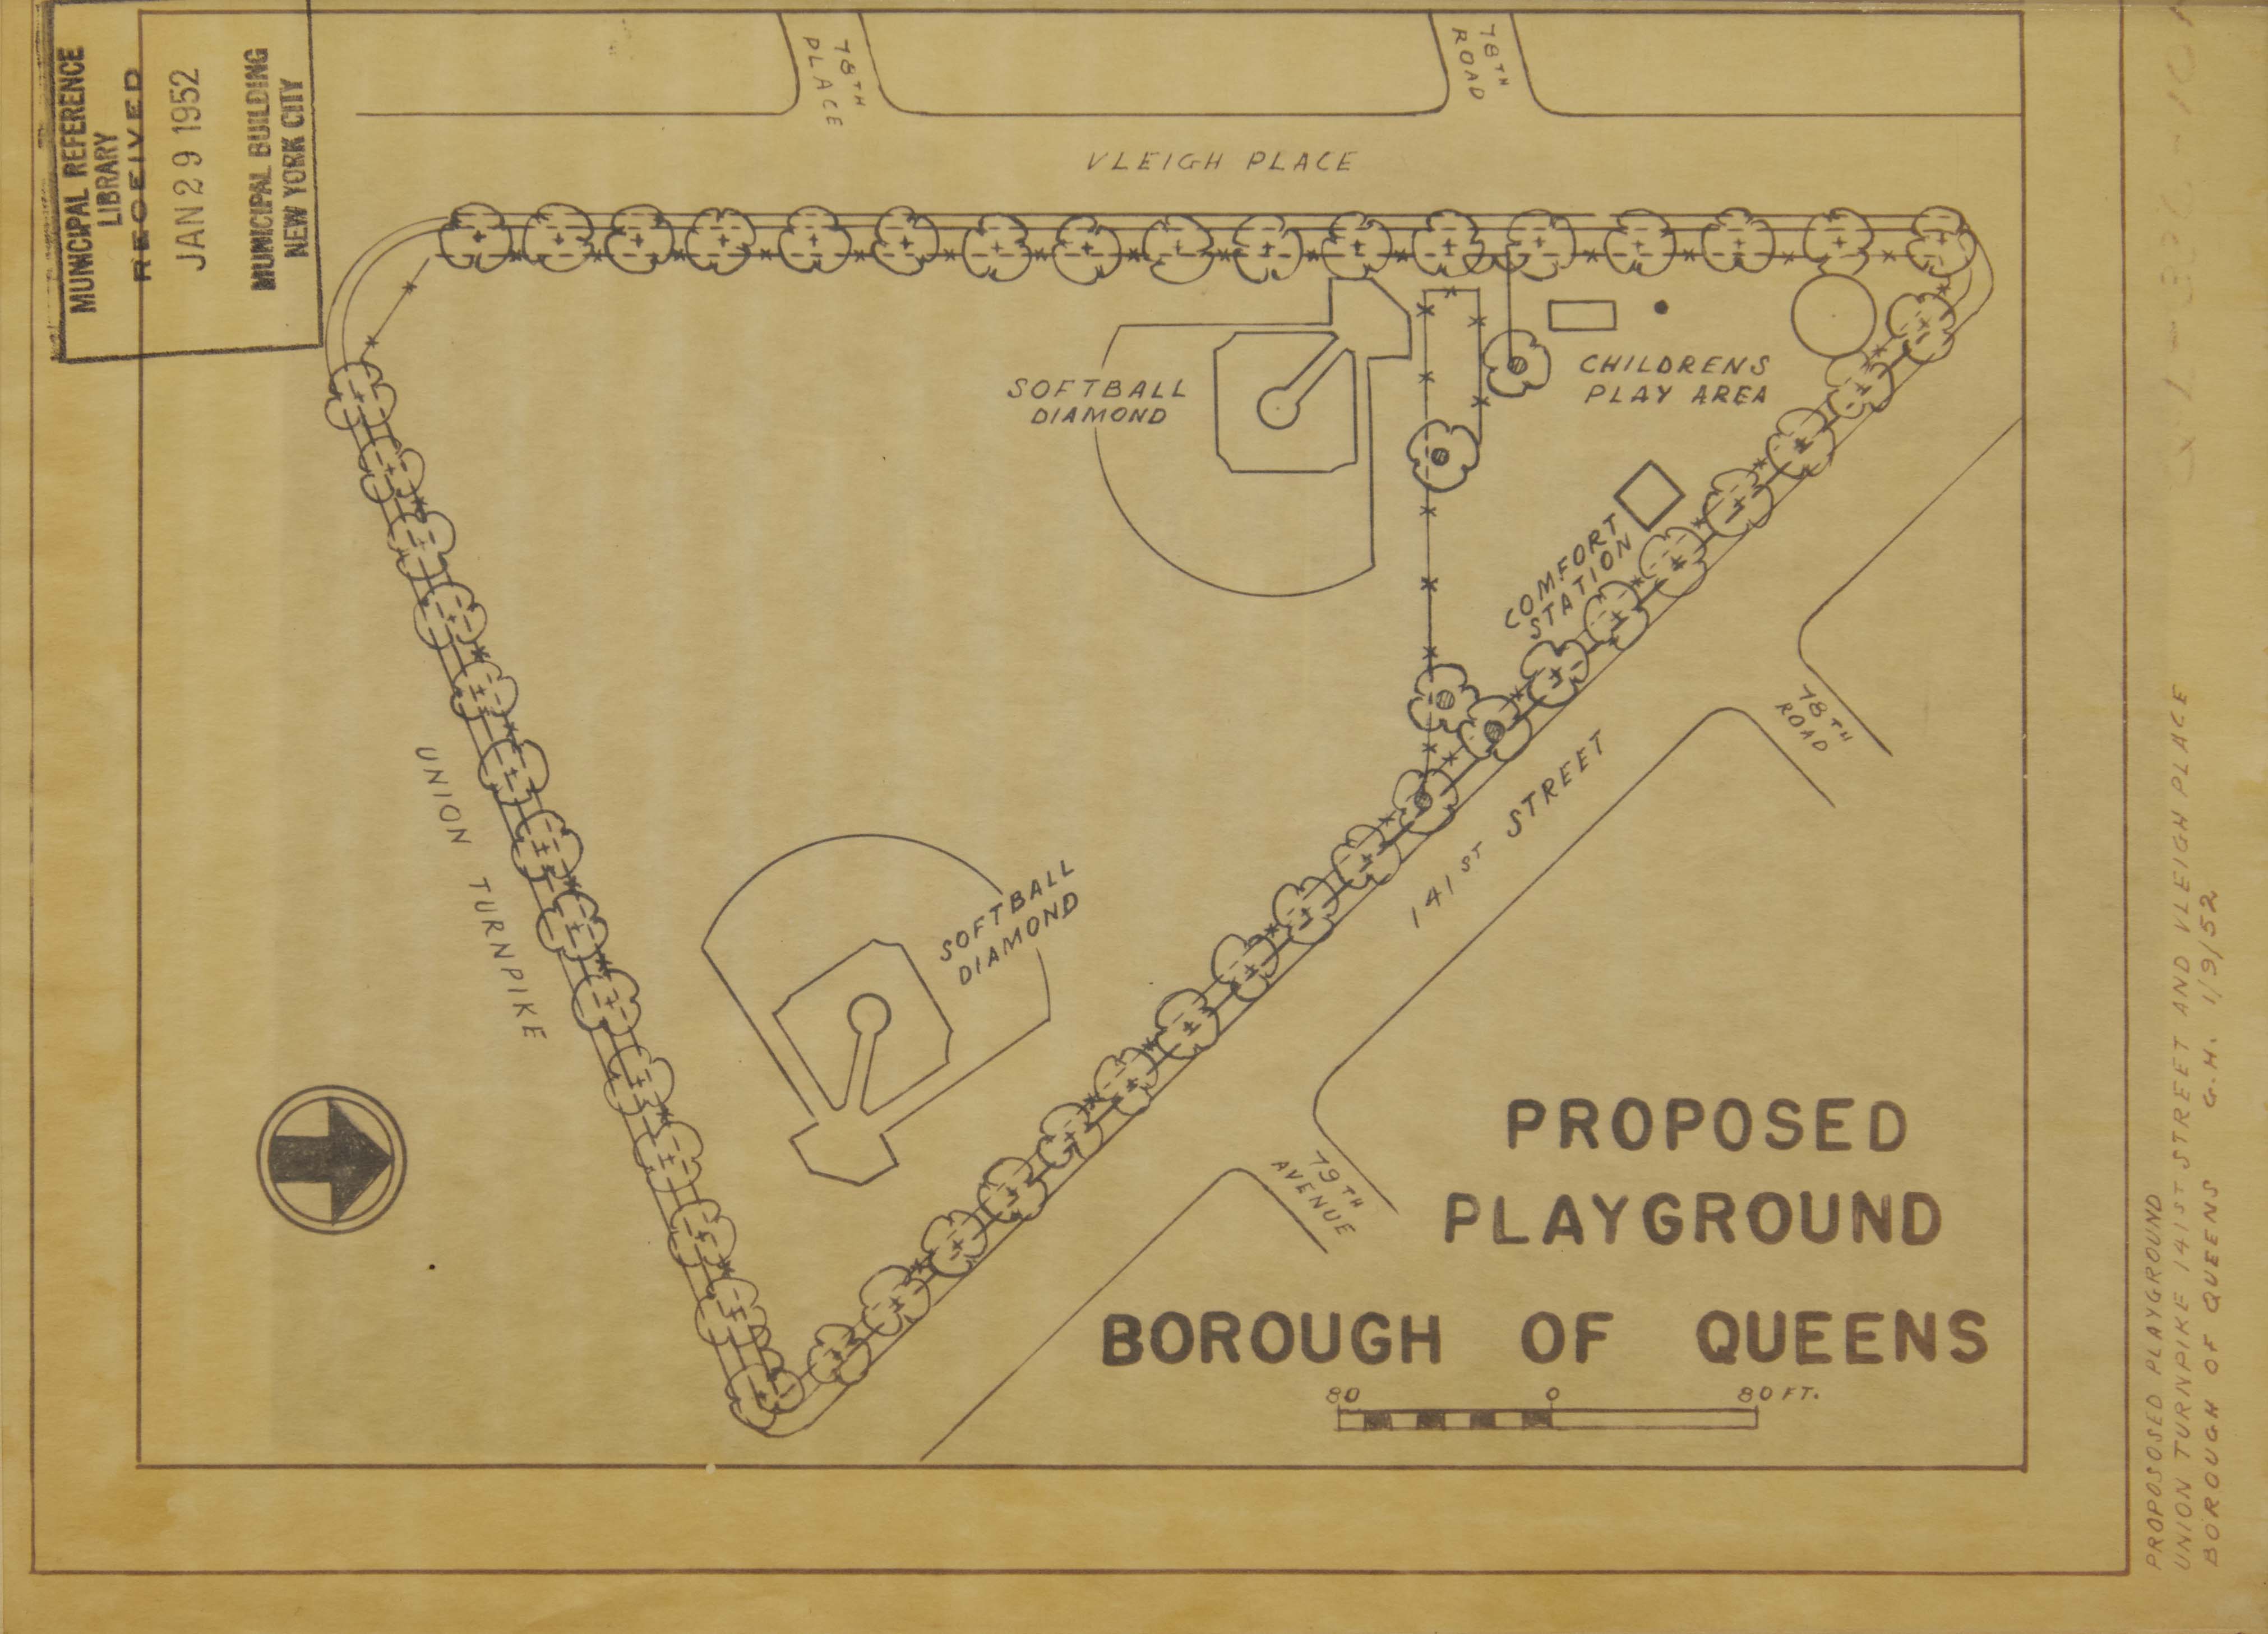 Hand-drawn diagram of the proposed park showing two softball diamonds, bathroom and children's play area in 1952